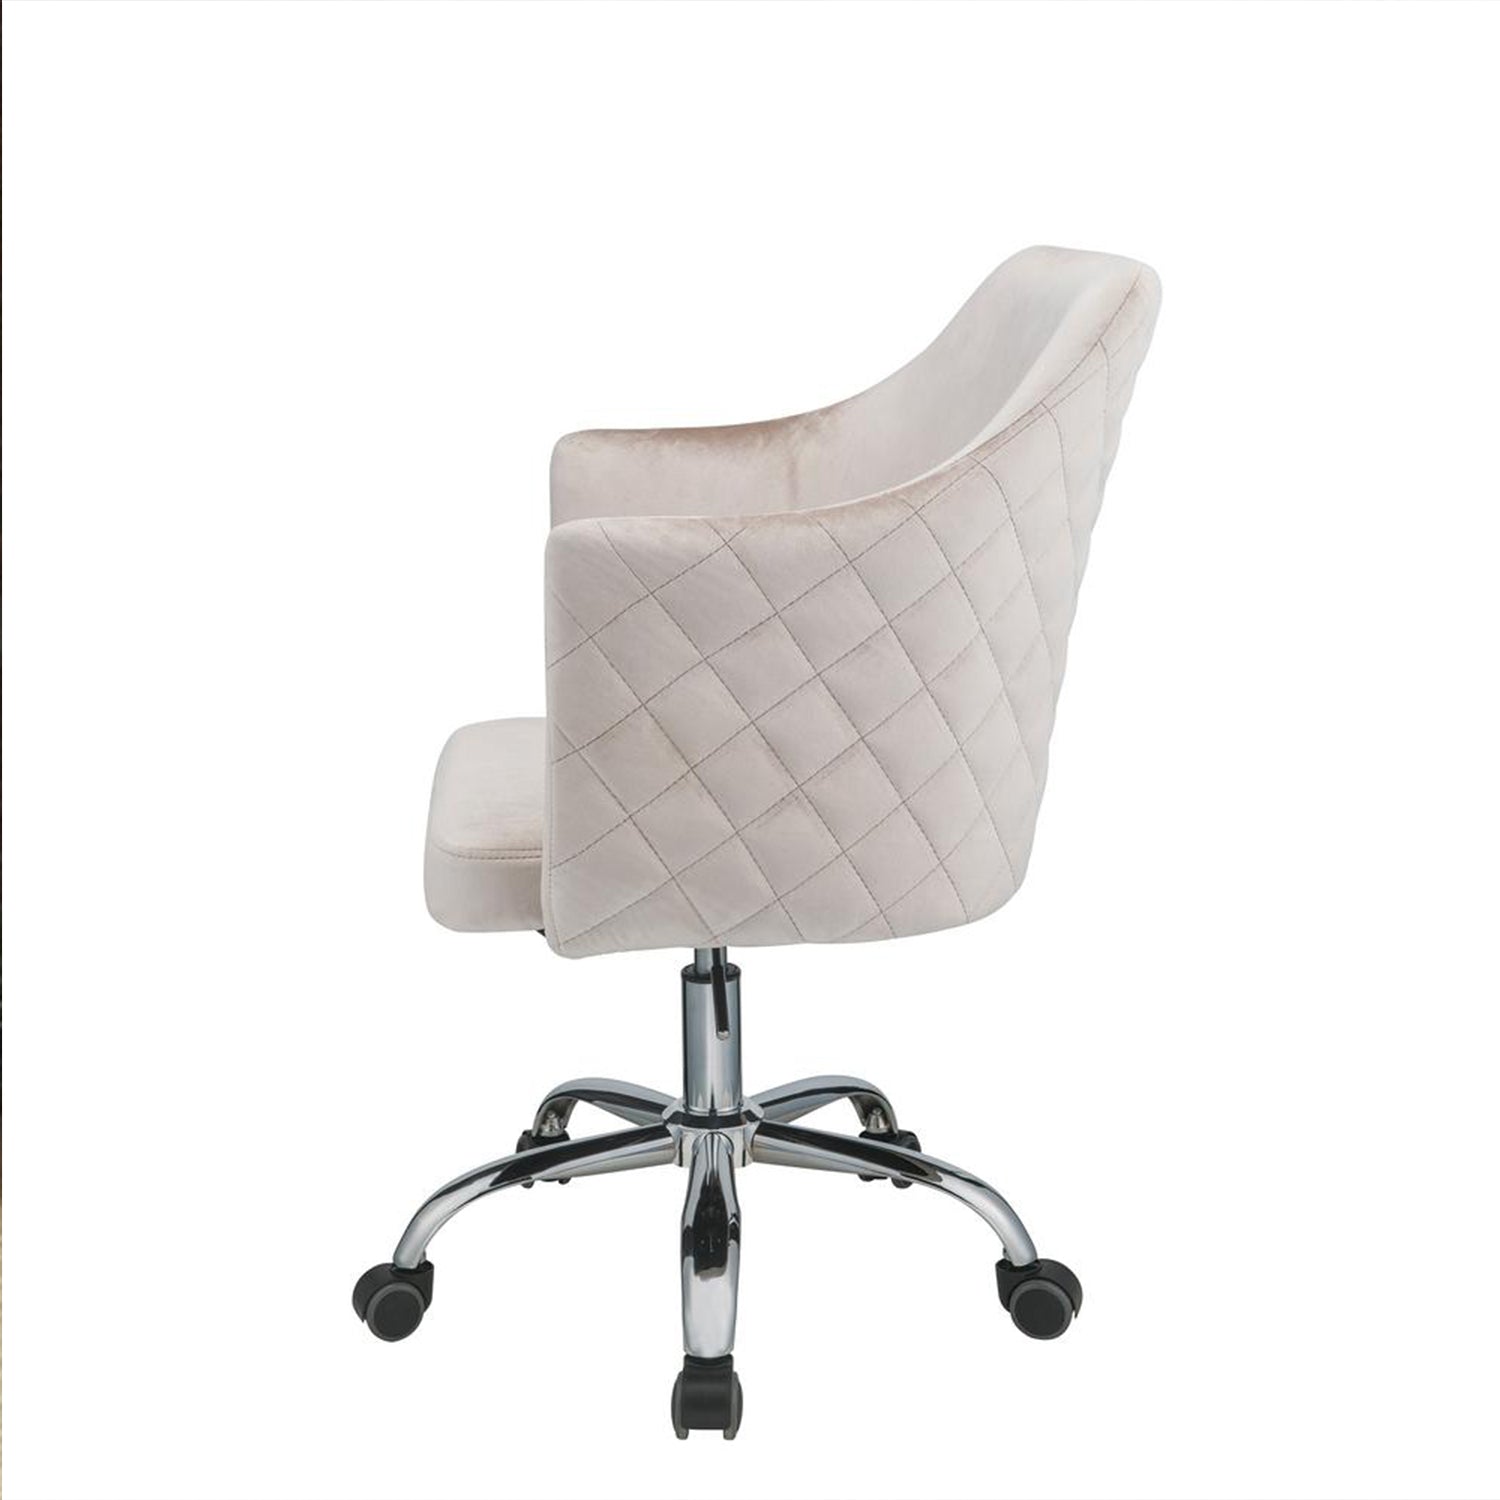 Champagne Fabric Seat Swivel Adjustable Task Chair Fabric Back Steel Frame